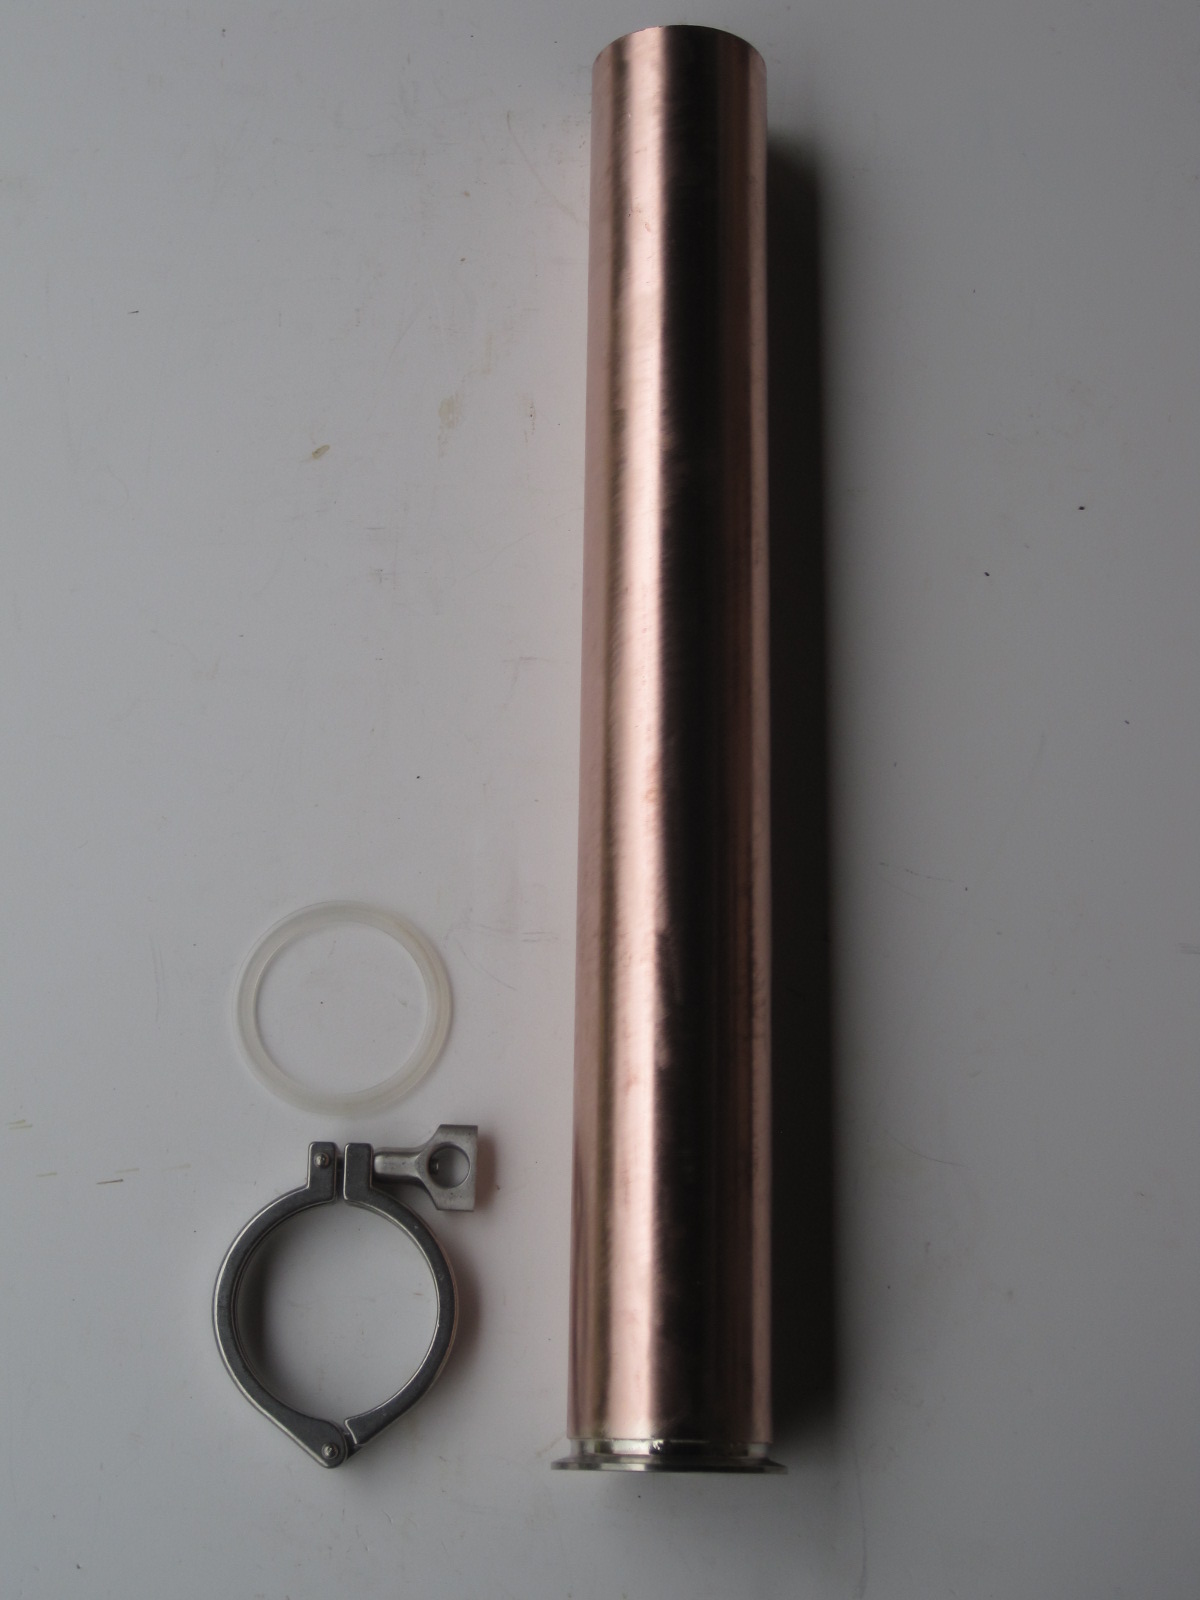 Details about   Beer Keg Kit Moonshine Still Head 1 ft COPPER column 2" x 1/2 tri clamp w/union 